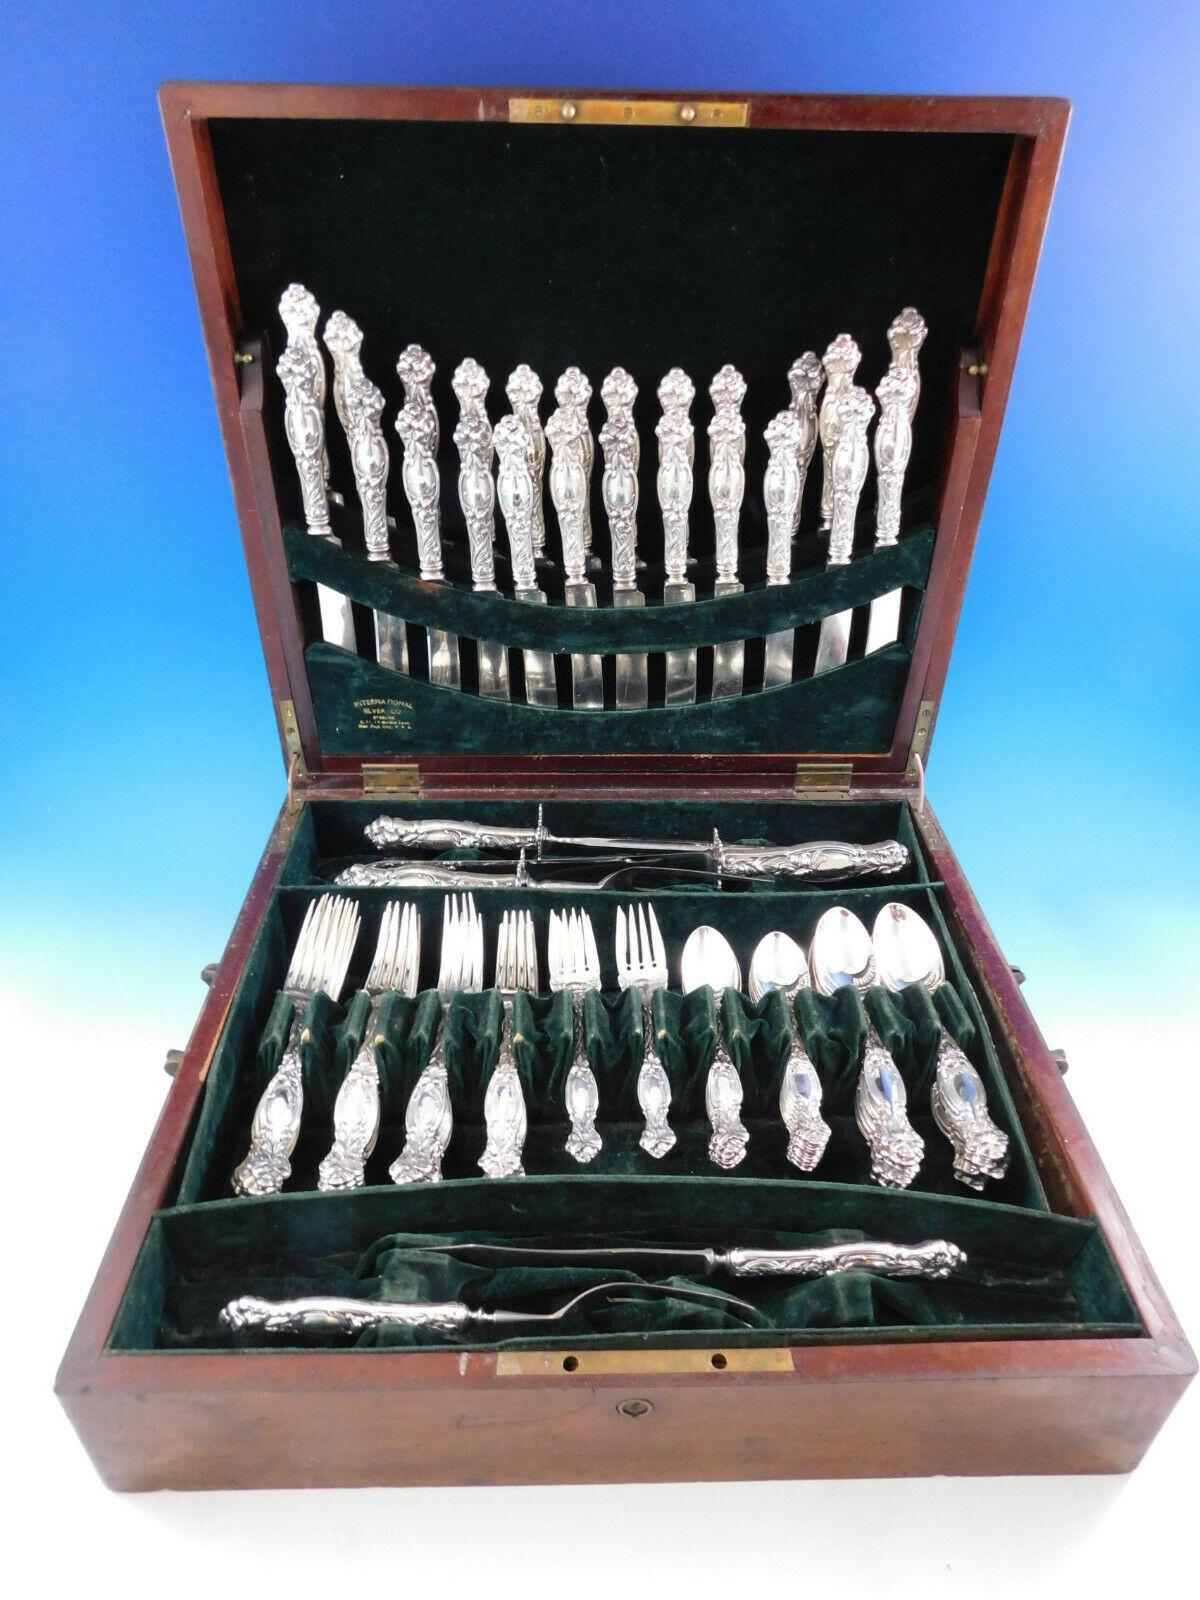 Monumental Frontenac by International sterling silver flatware set, 89 pieces. This set includes:

12 dinner size knives, 9 3/4